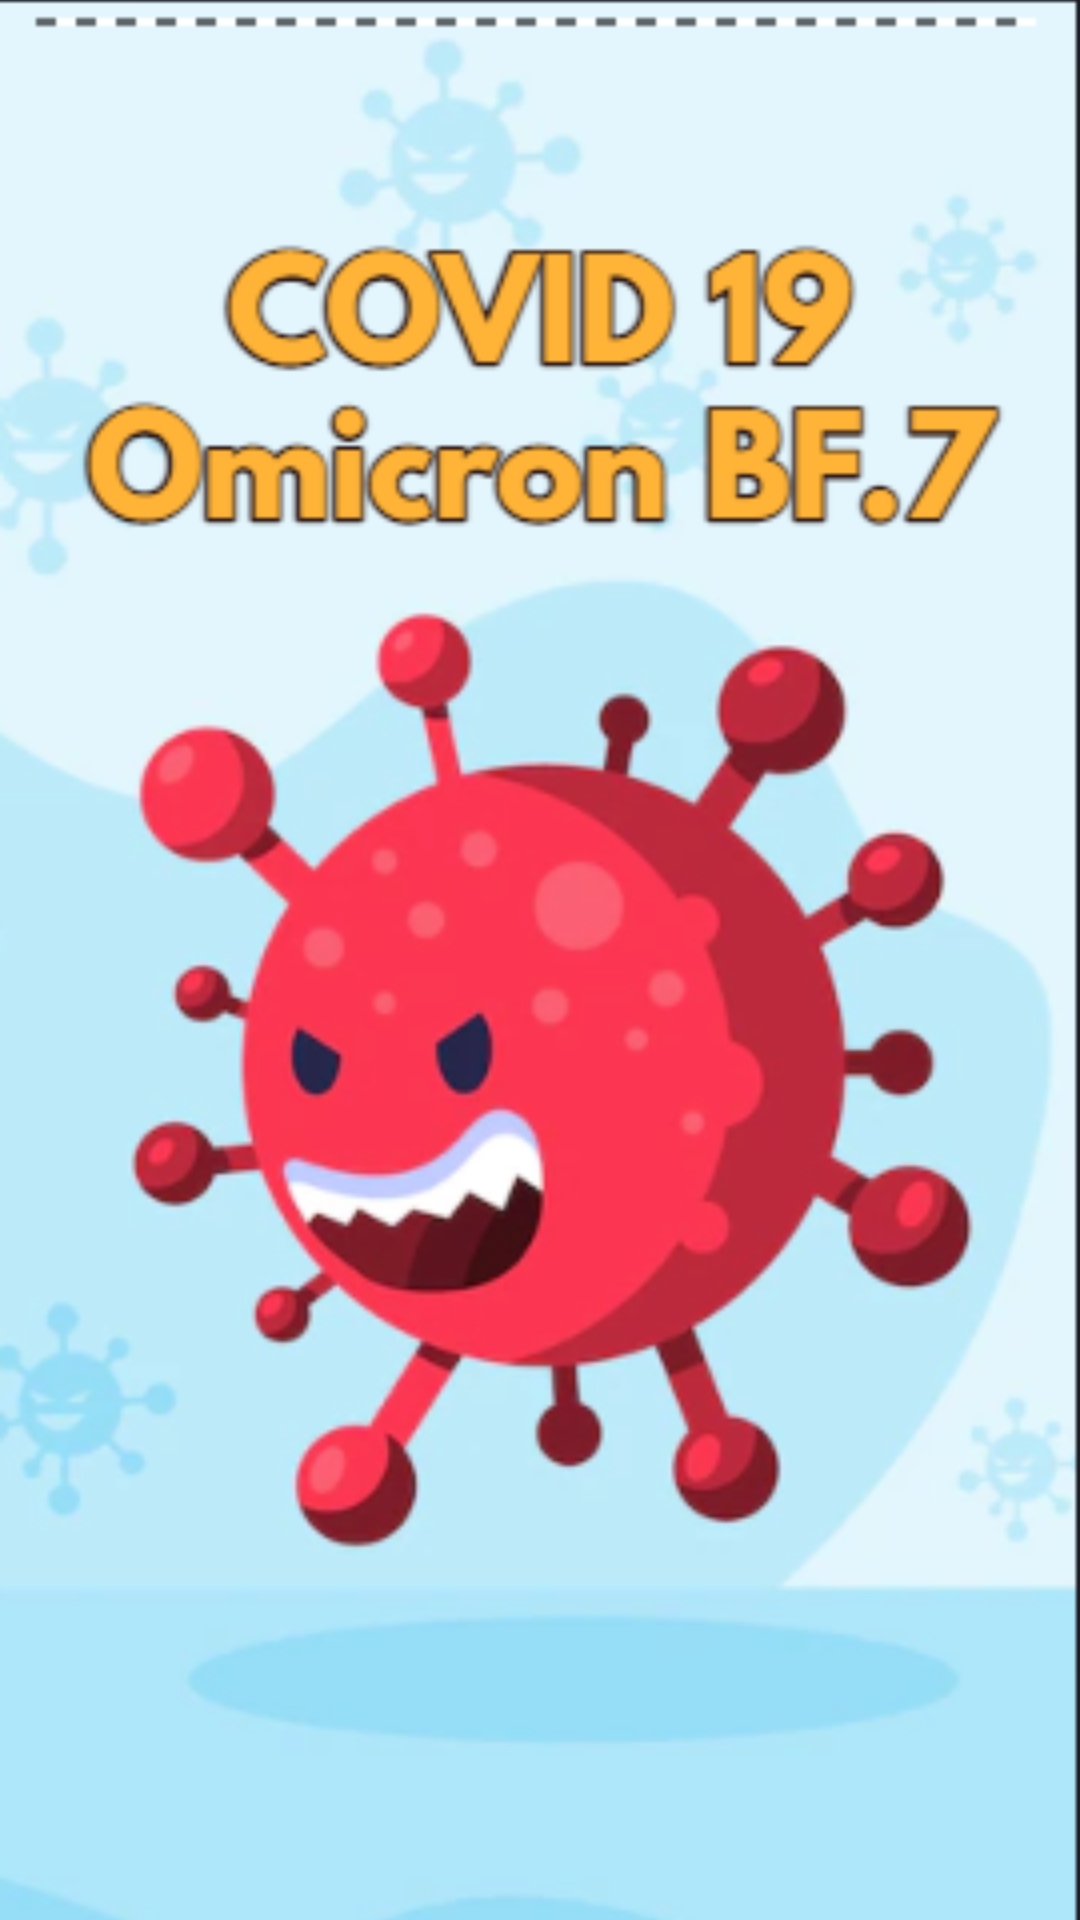 Covid 19: As Omicron BF7 spreads in India, know symptoms	